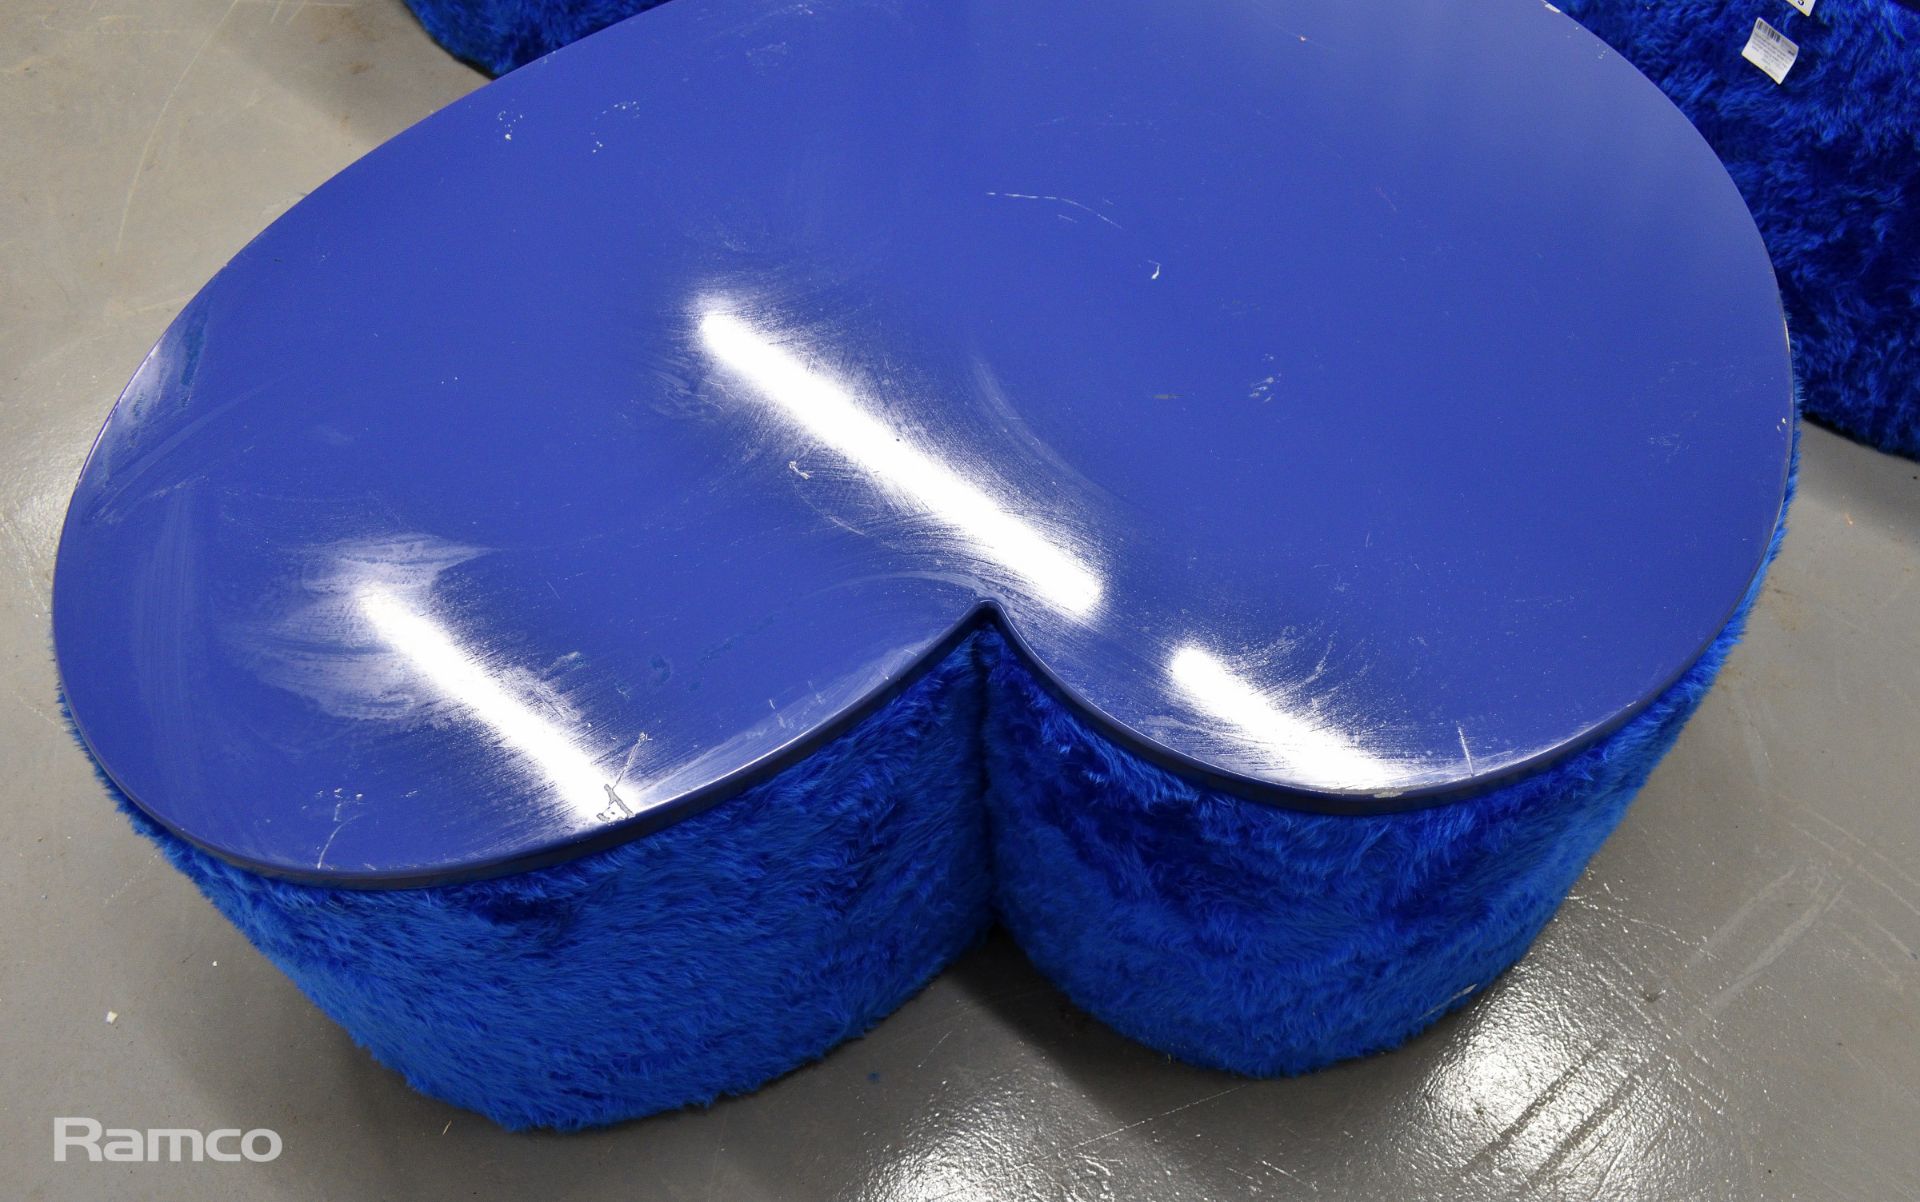 3x Asymmetrical heart shaped blue fur-covered wooden tables from countries' seating area - Image 8 of 14